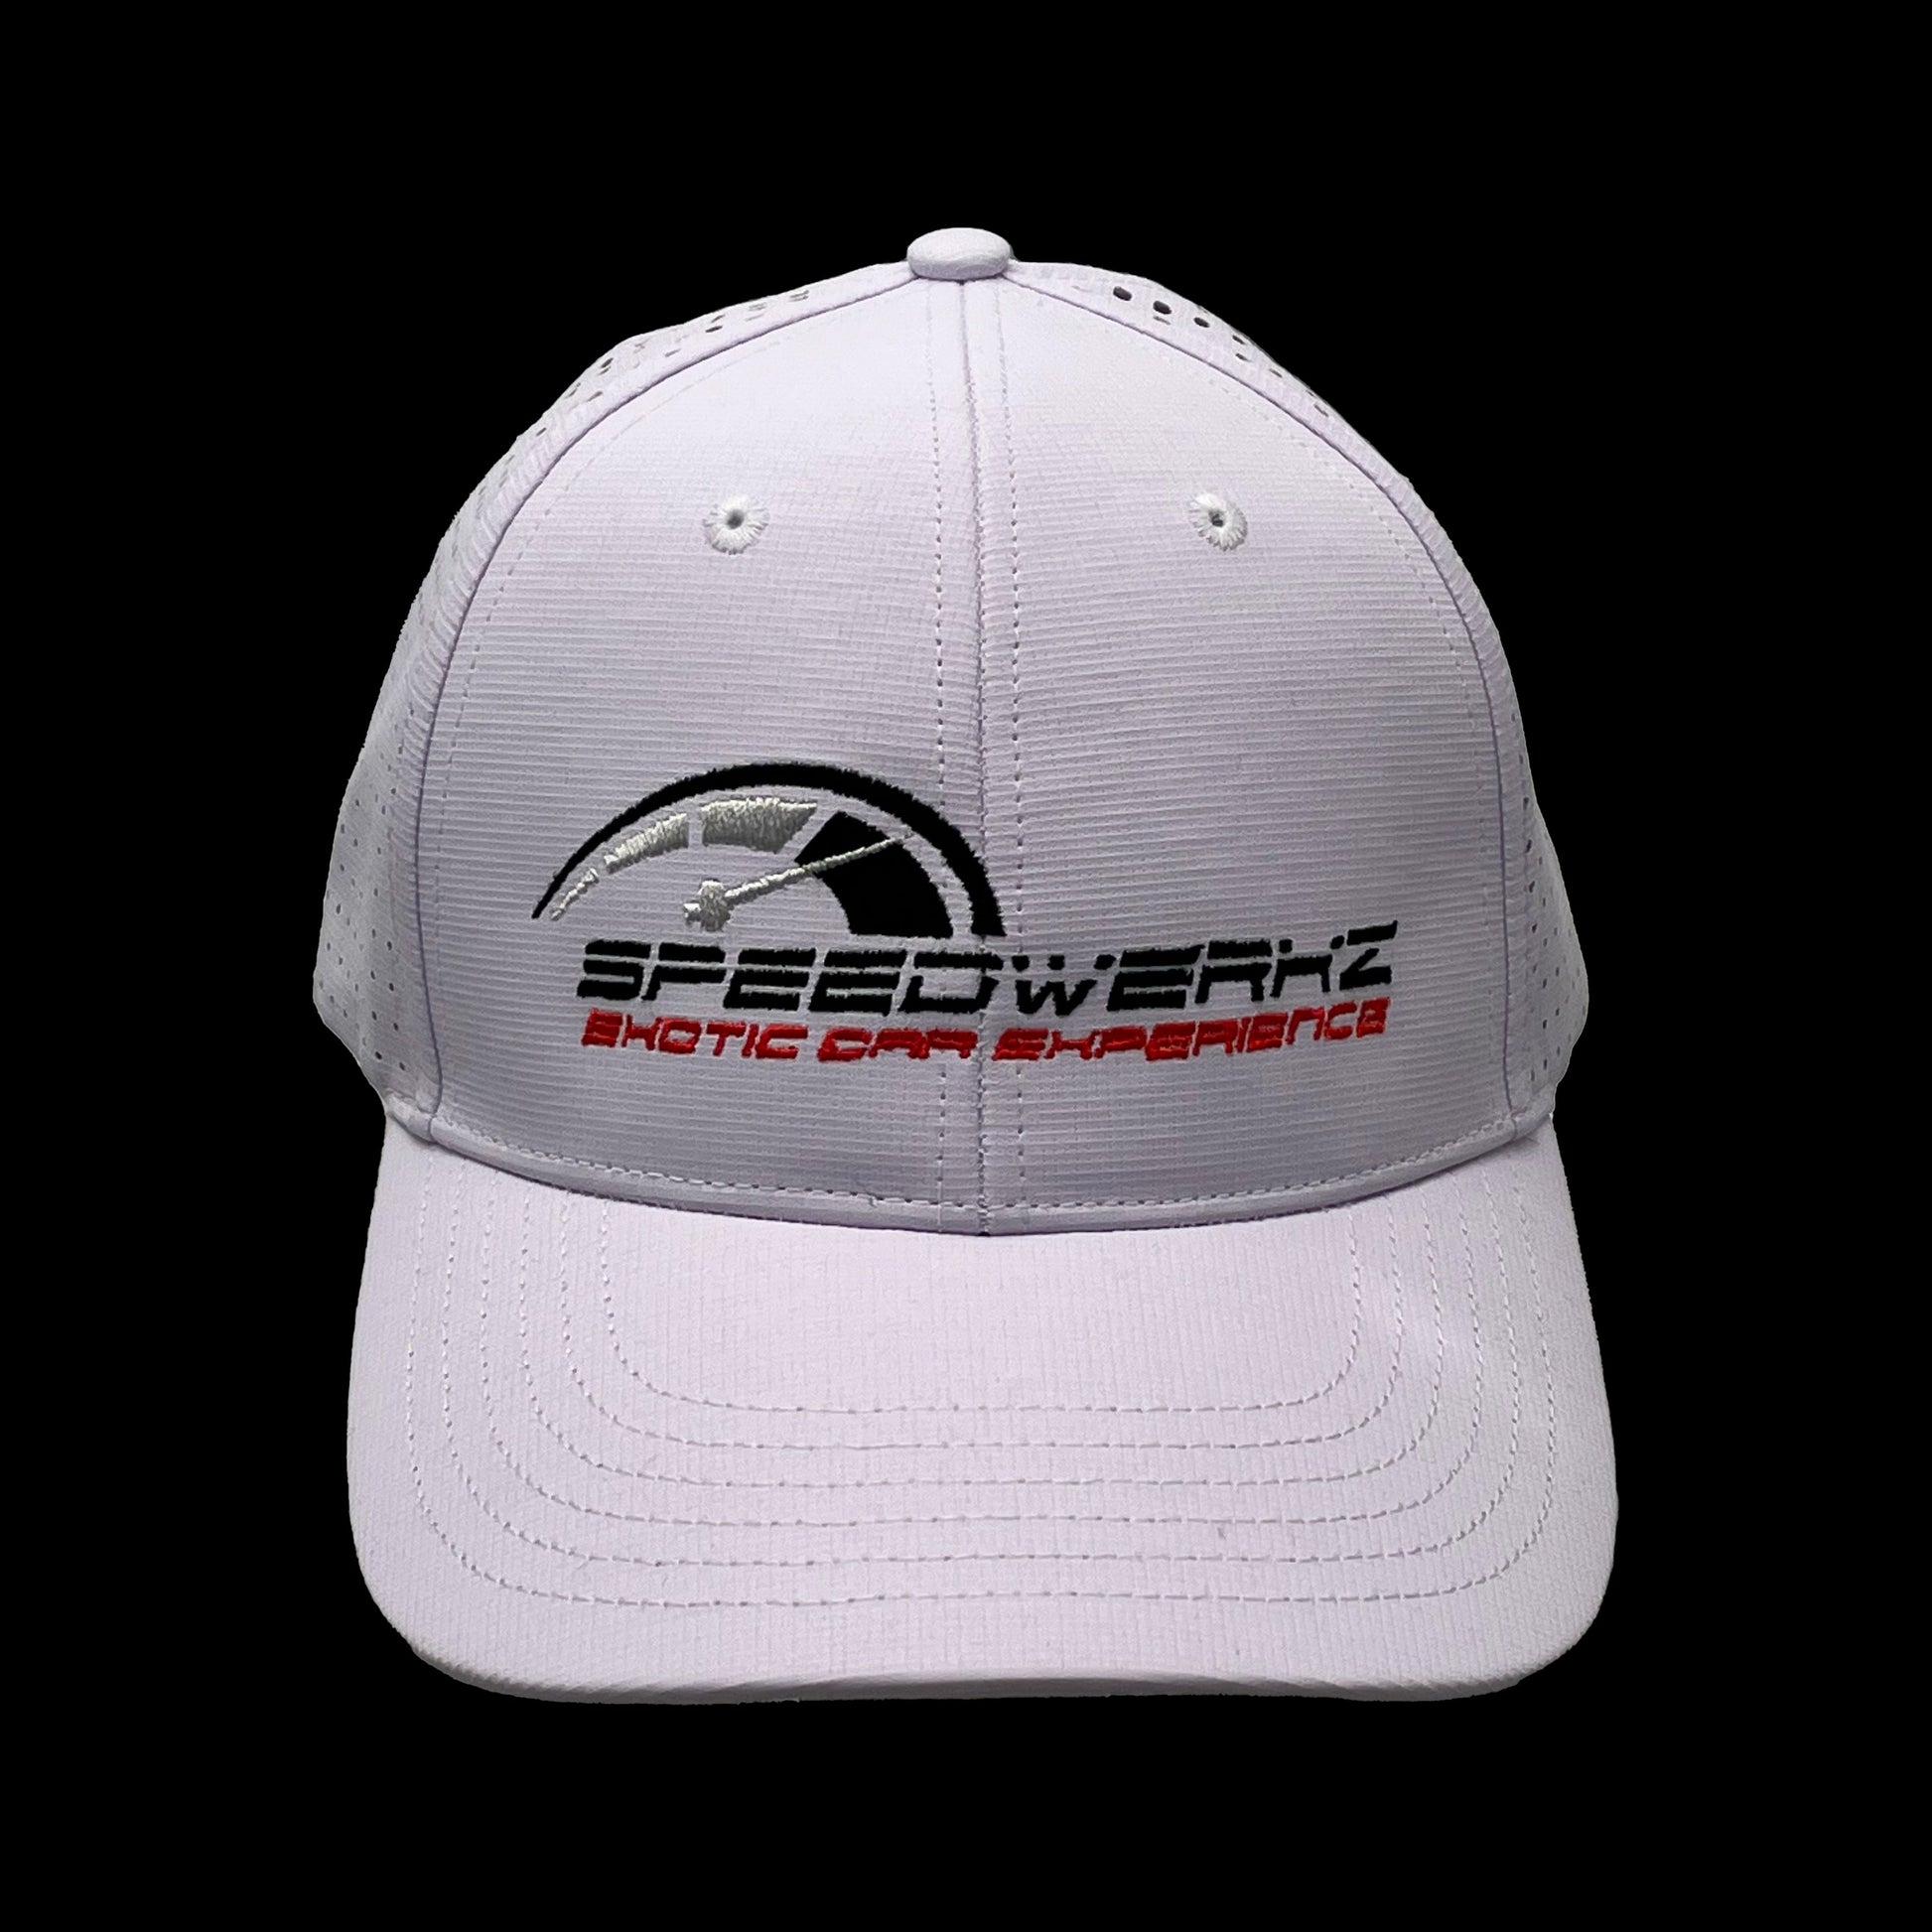 white Speedwerkz hat with a black and red logo